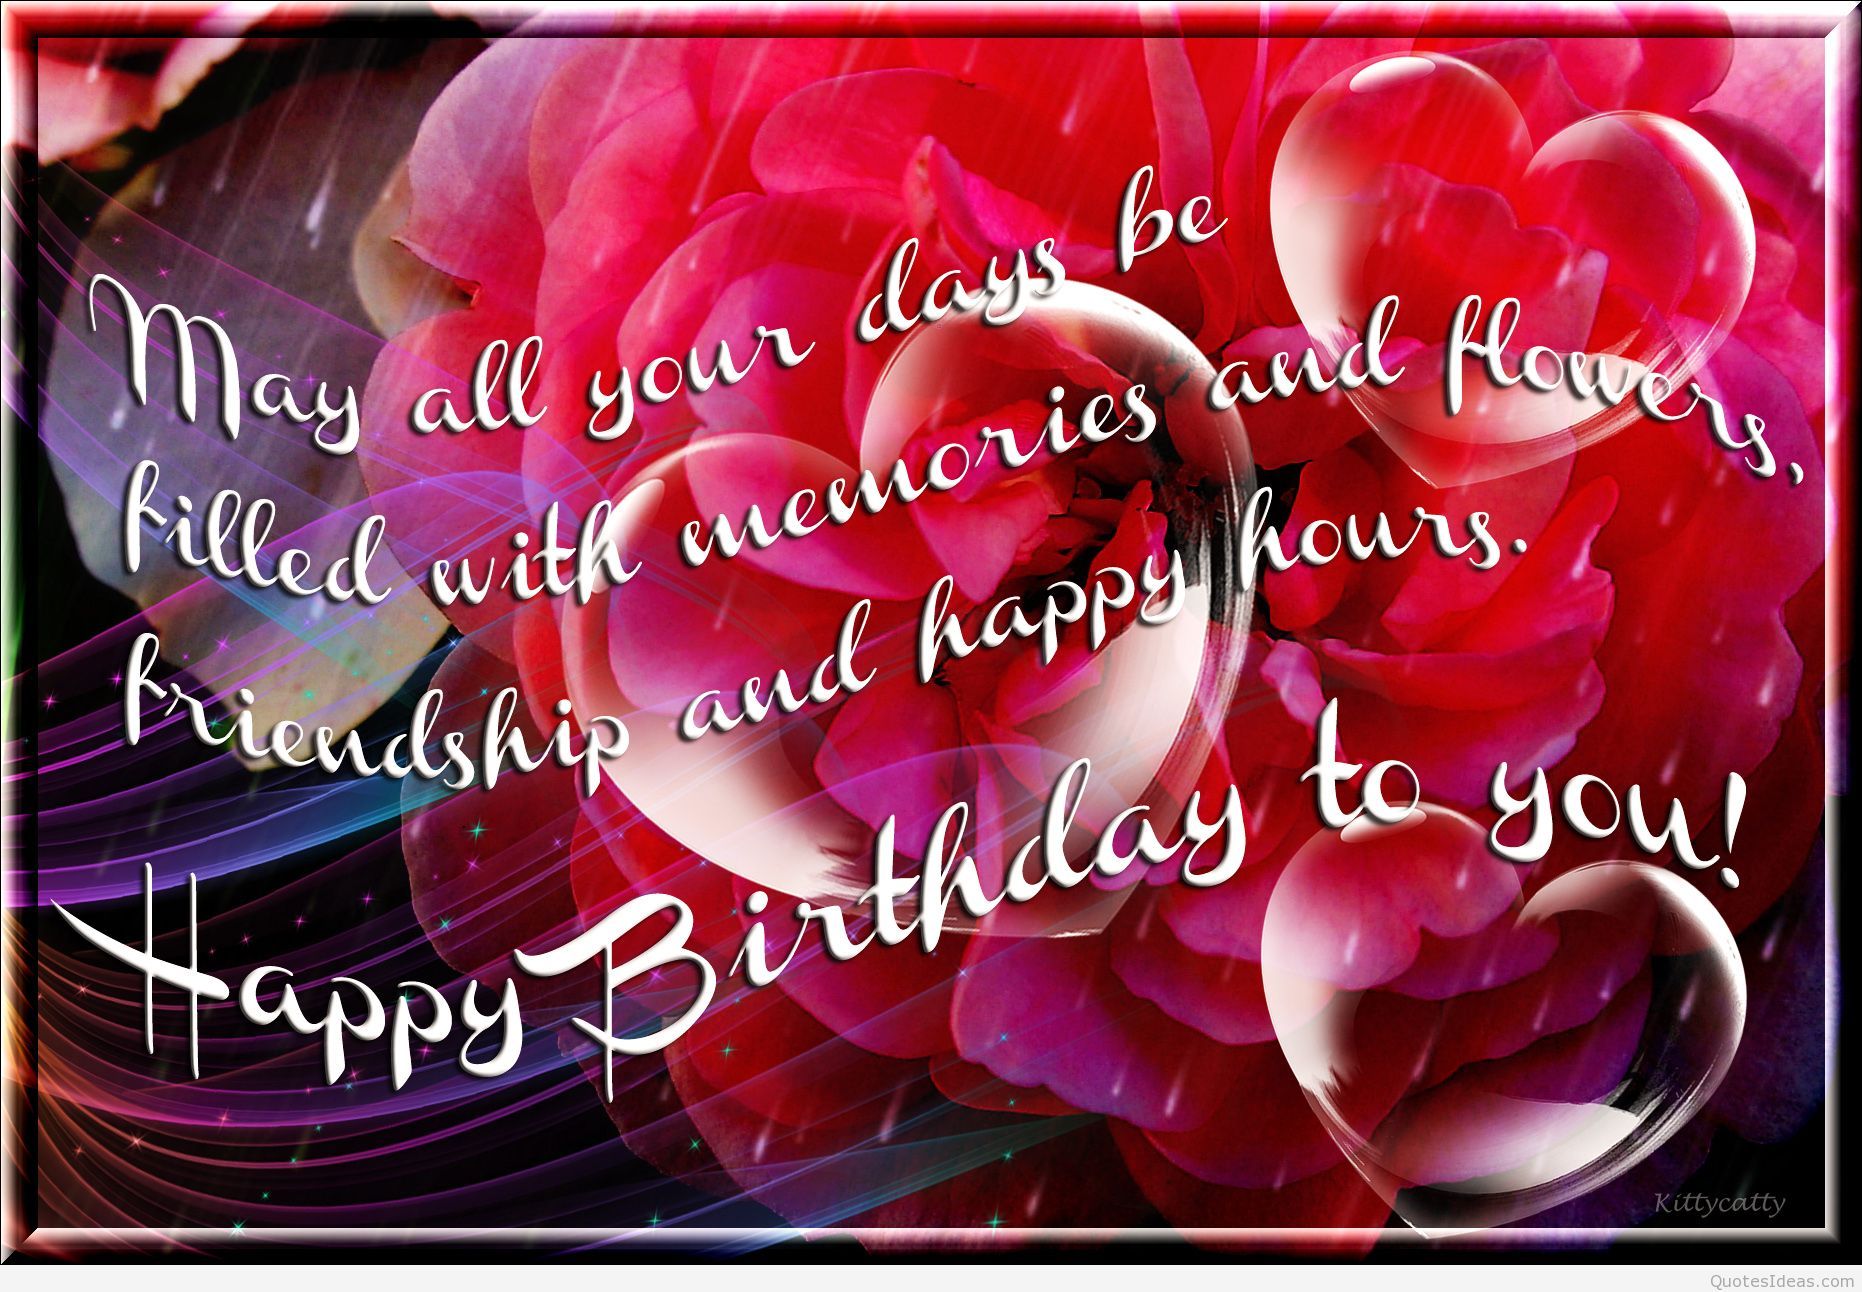 Download Free Happy Birthday Wallpapers with Quotes - The Quotes Land